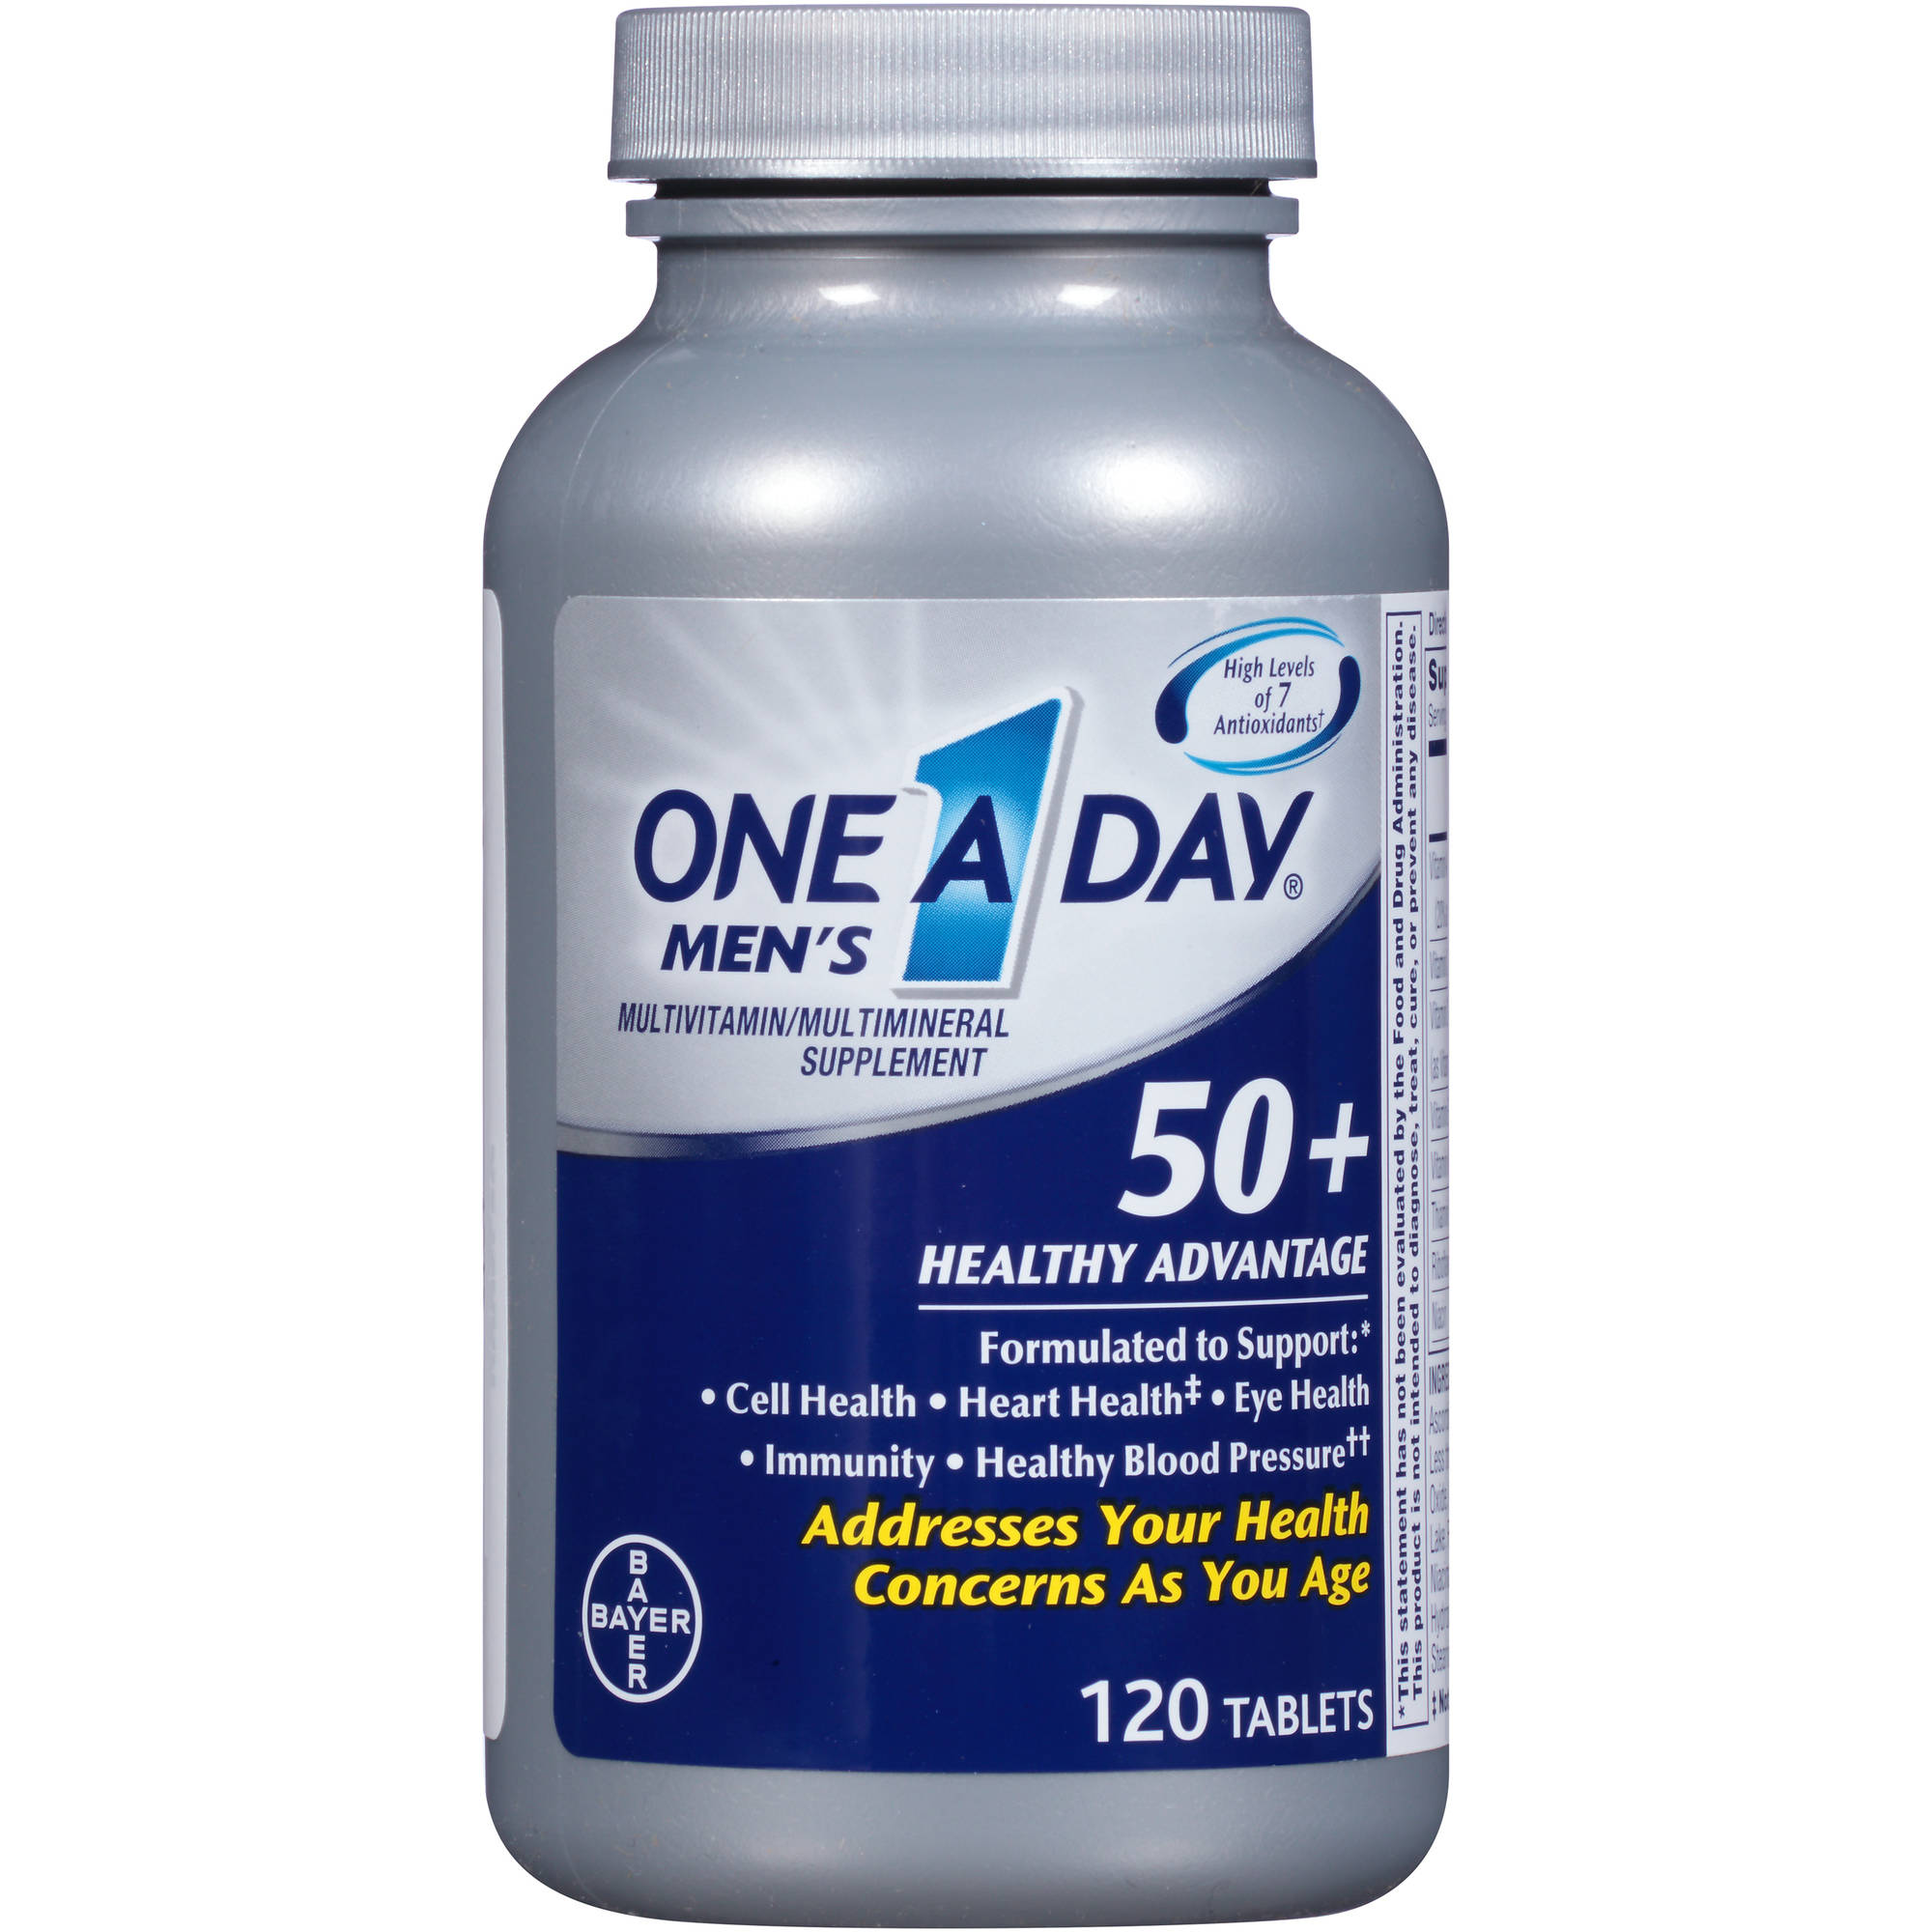 One A Day Multivitamin/Multimineral Supplement, 50+ Healthy Advantage